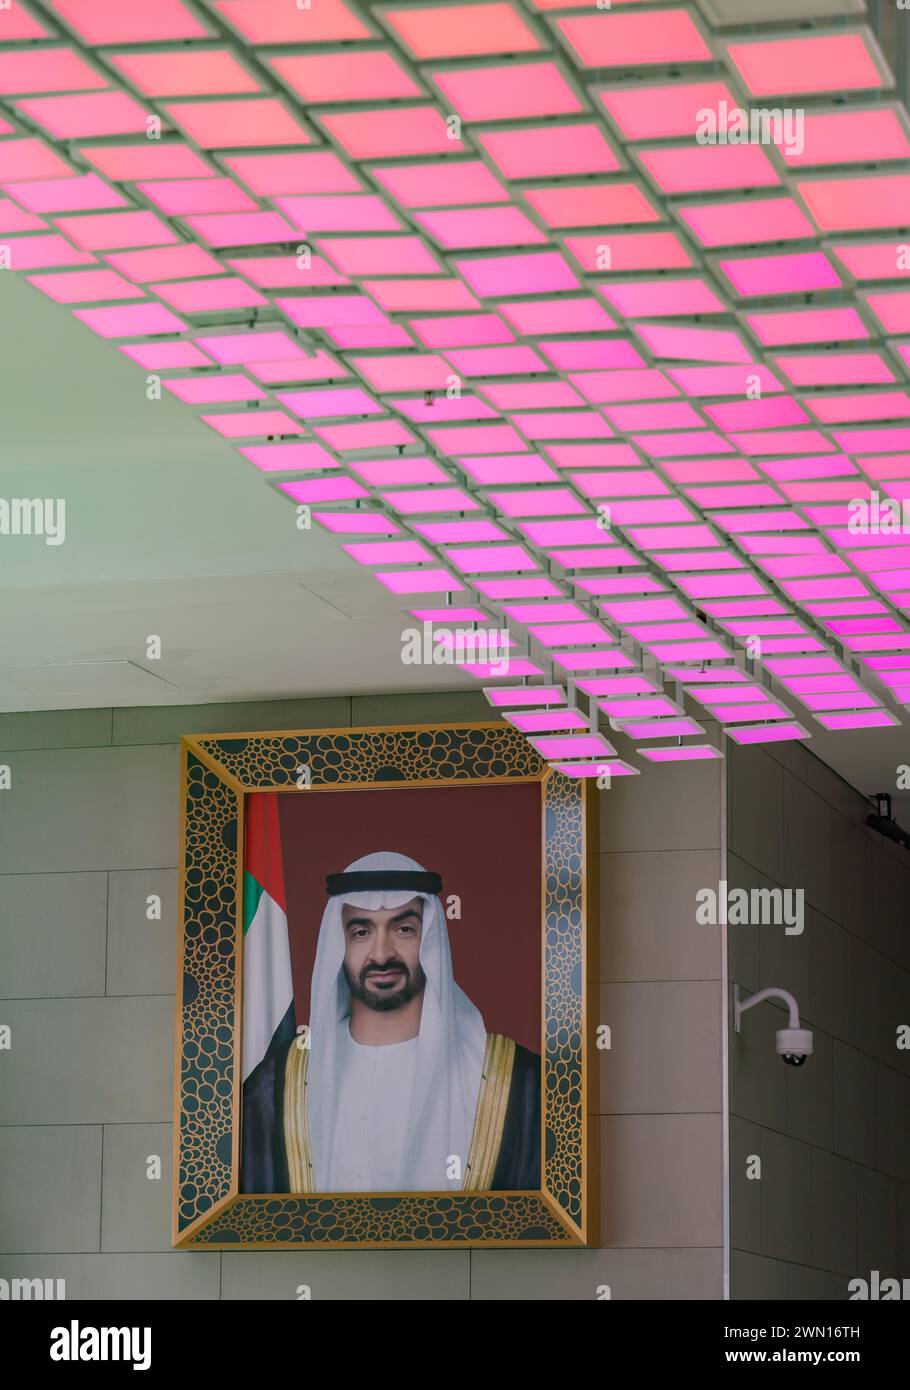 A picture of a portrait of the Sheikh Mohammed bin Zayed Al Nahyan inside the Dubai Frame. Stock Photo